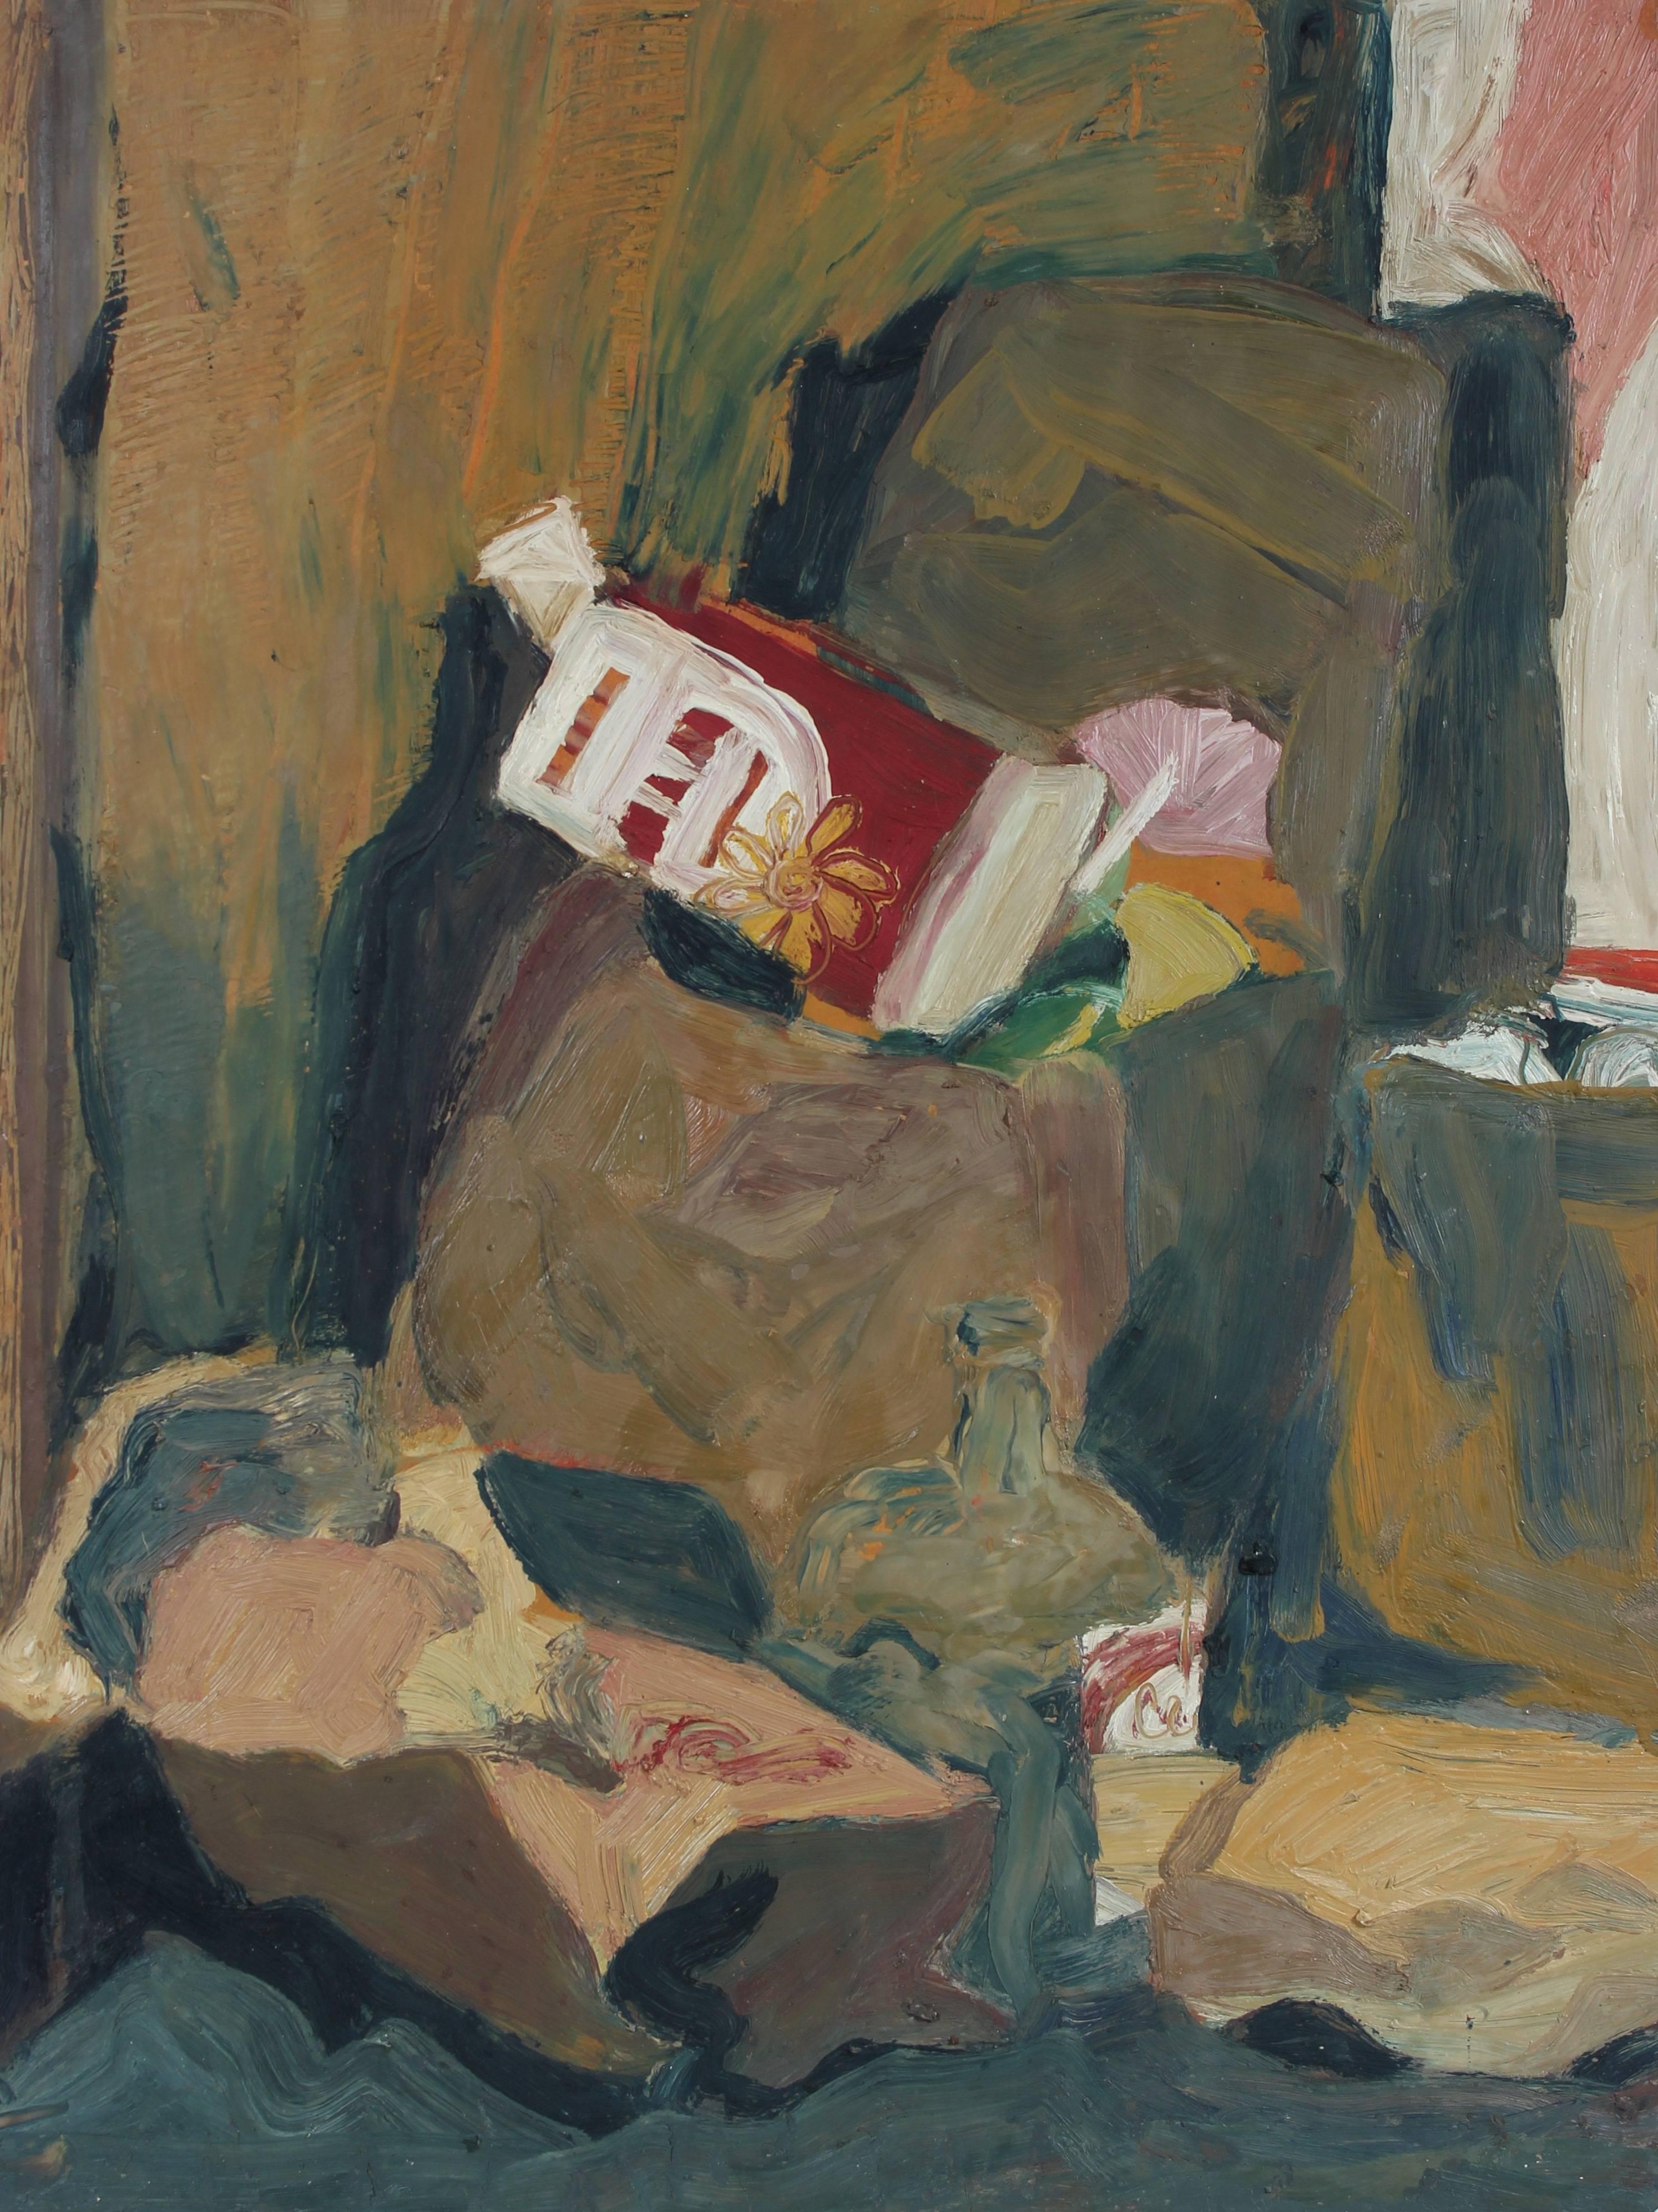 Jane Rades Still-Life Painting - Muted Still Life in Oil Paint with Grocery Bags and Bottles, Circa 1960s